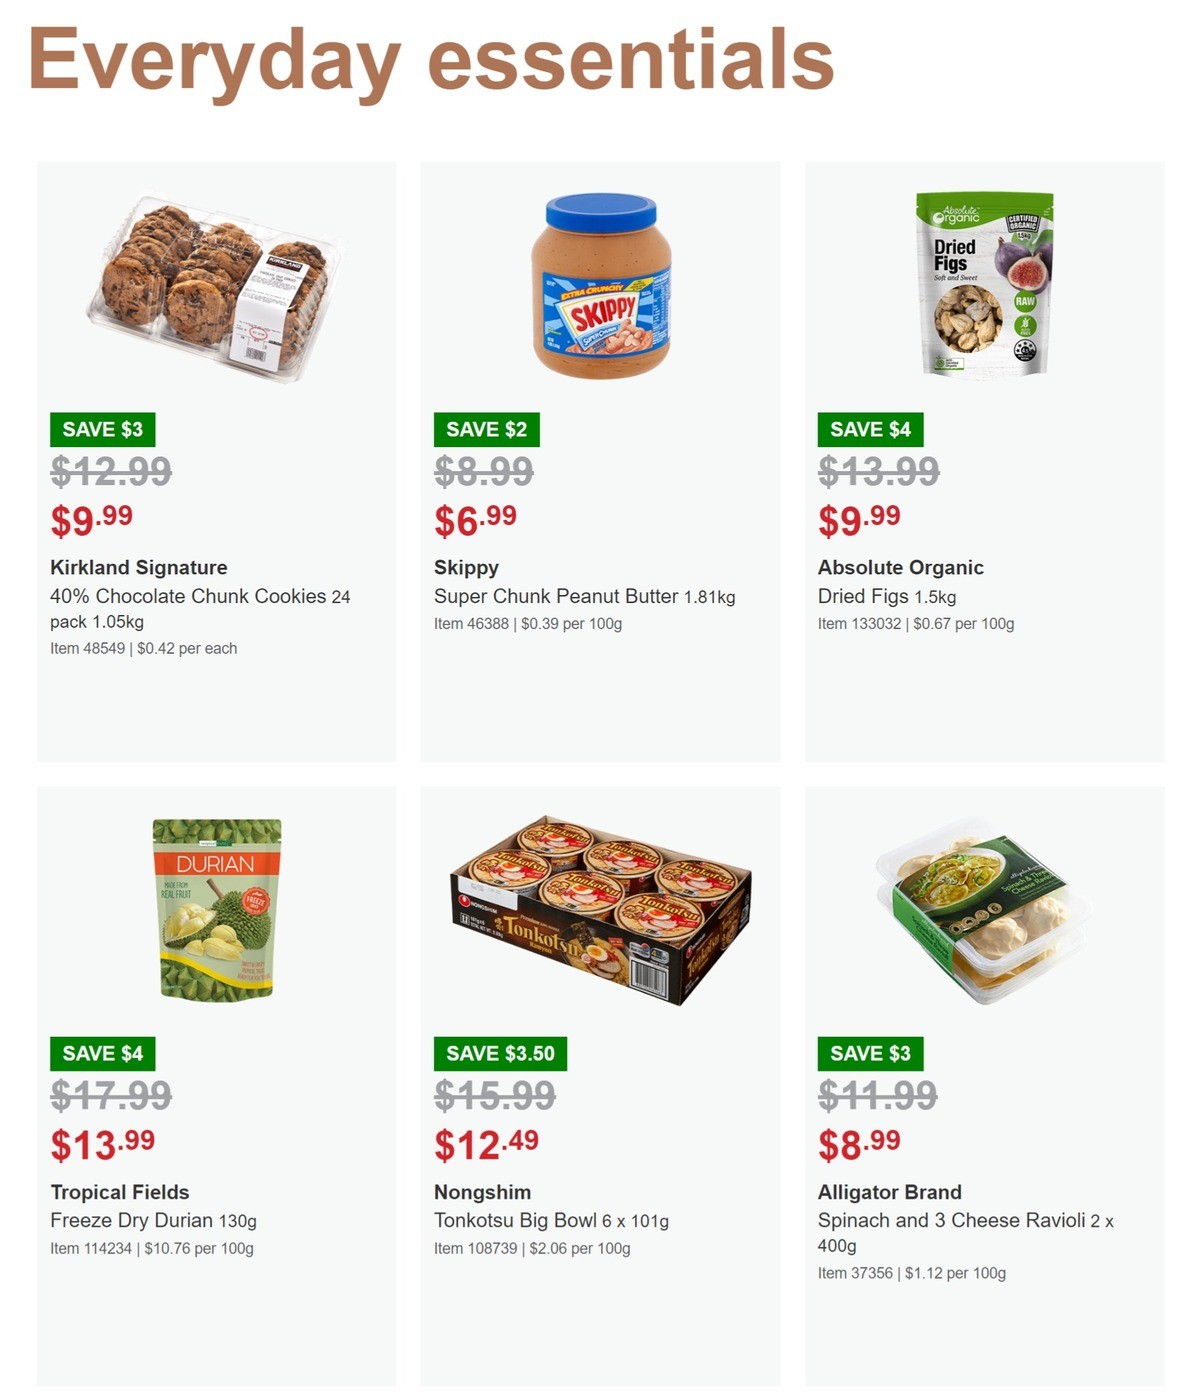 Costco Catalogues from 10 October